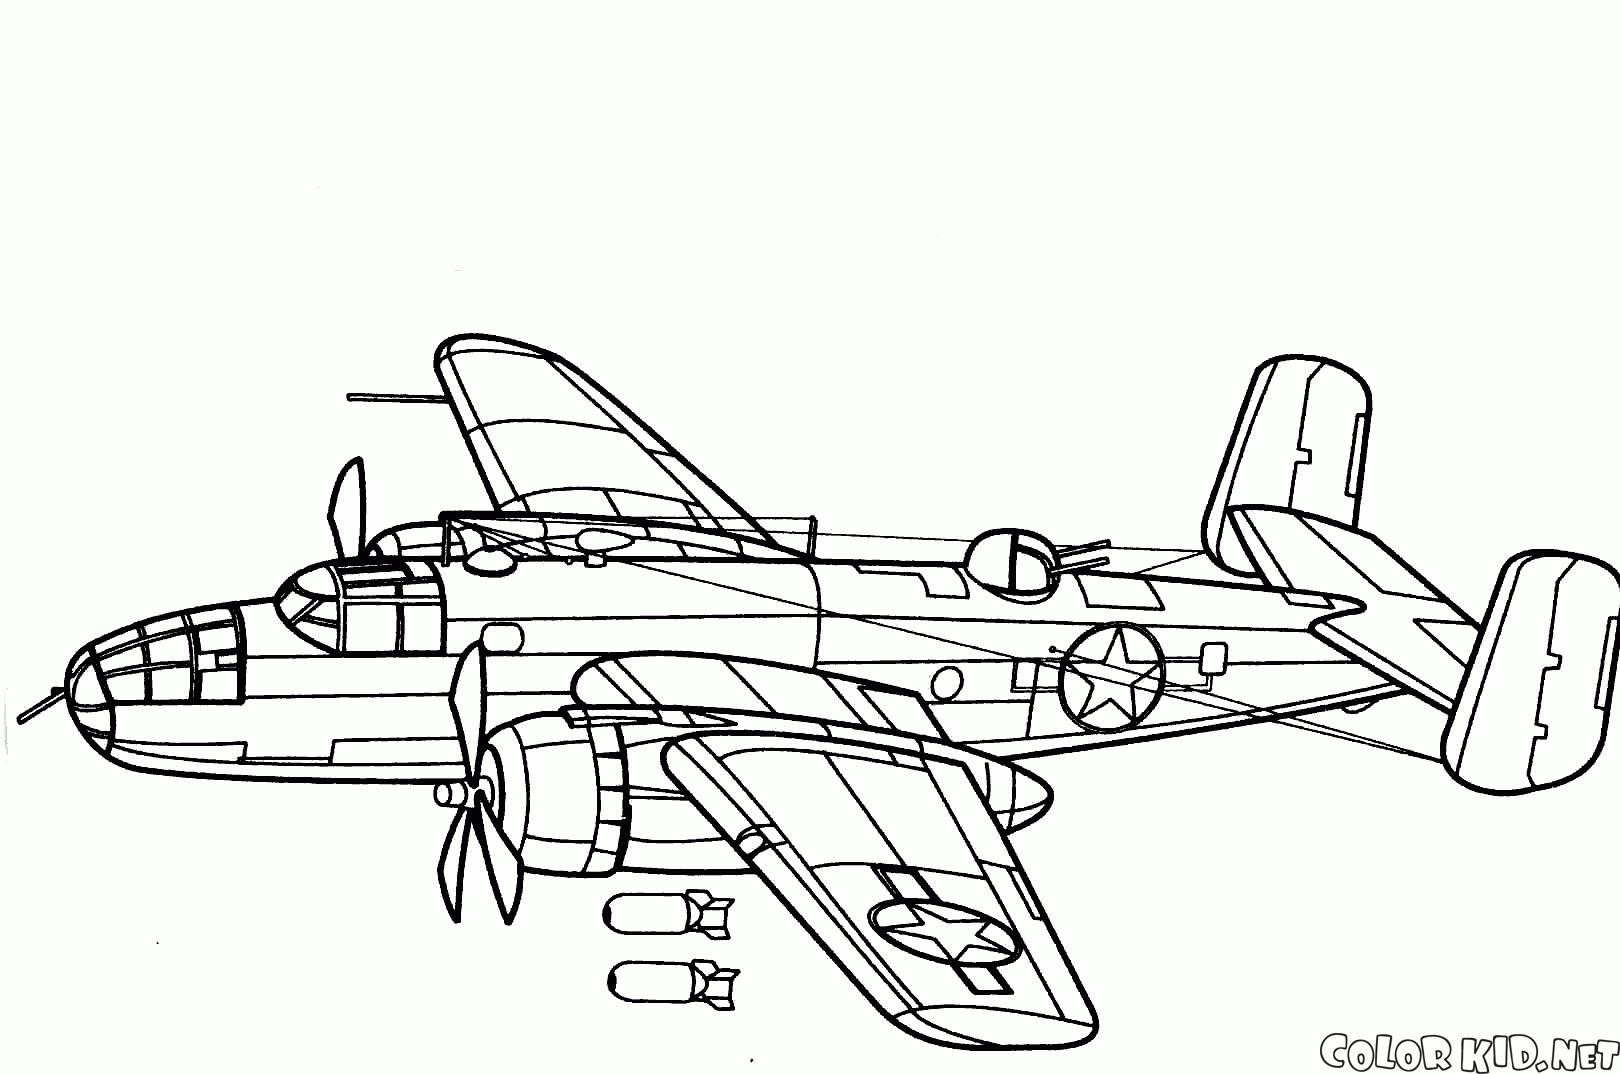 Coloring page - Su-12 spotter aircraft